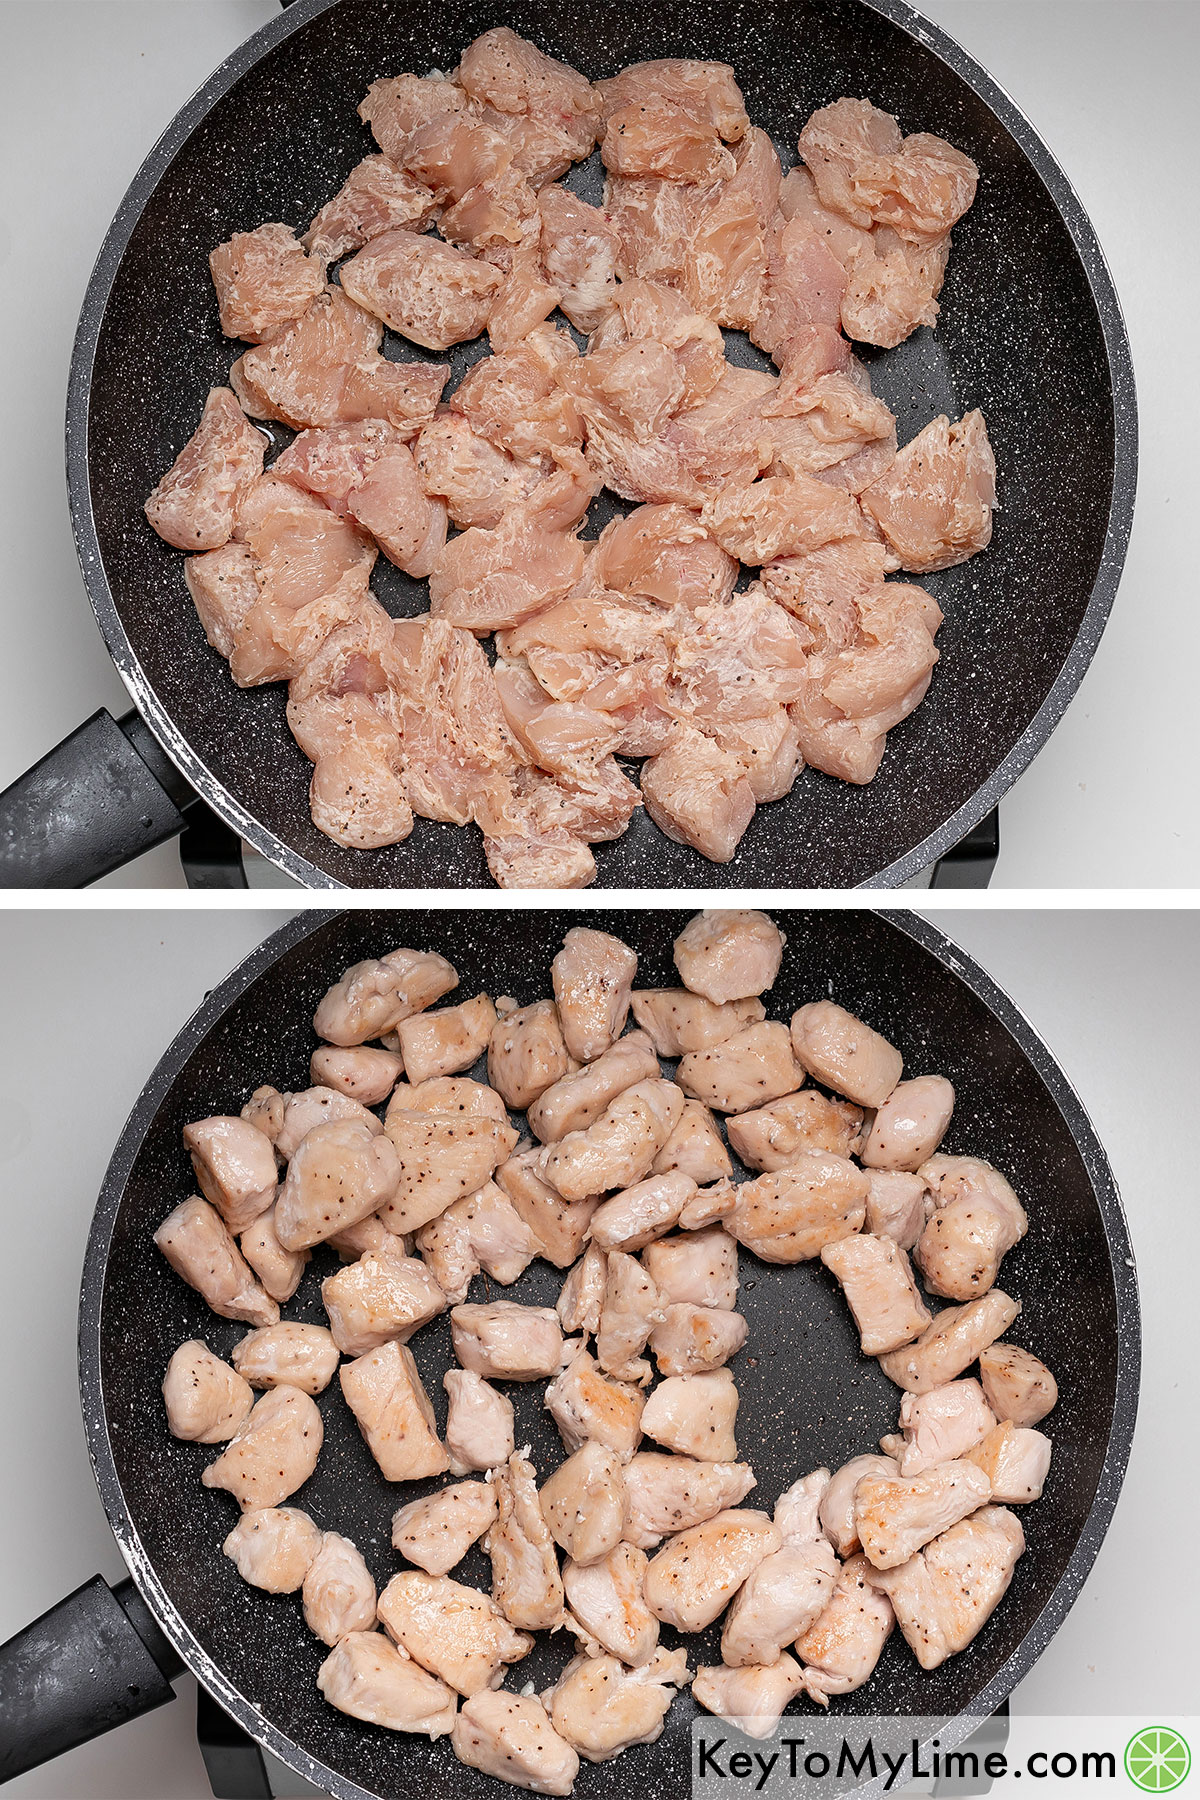 Adding the fully coated chicken to a hot skillet with oil and cooking until browned.